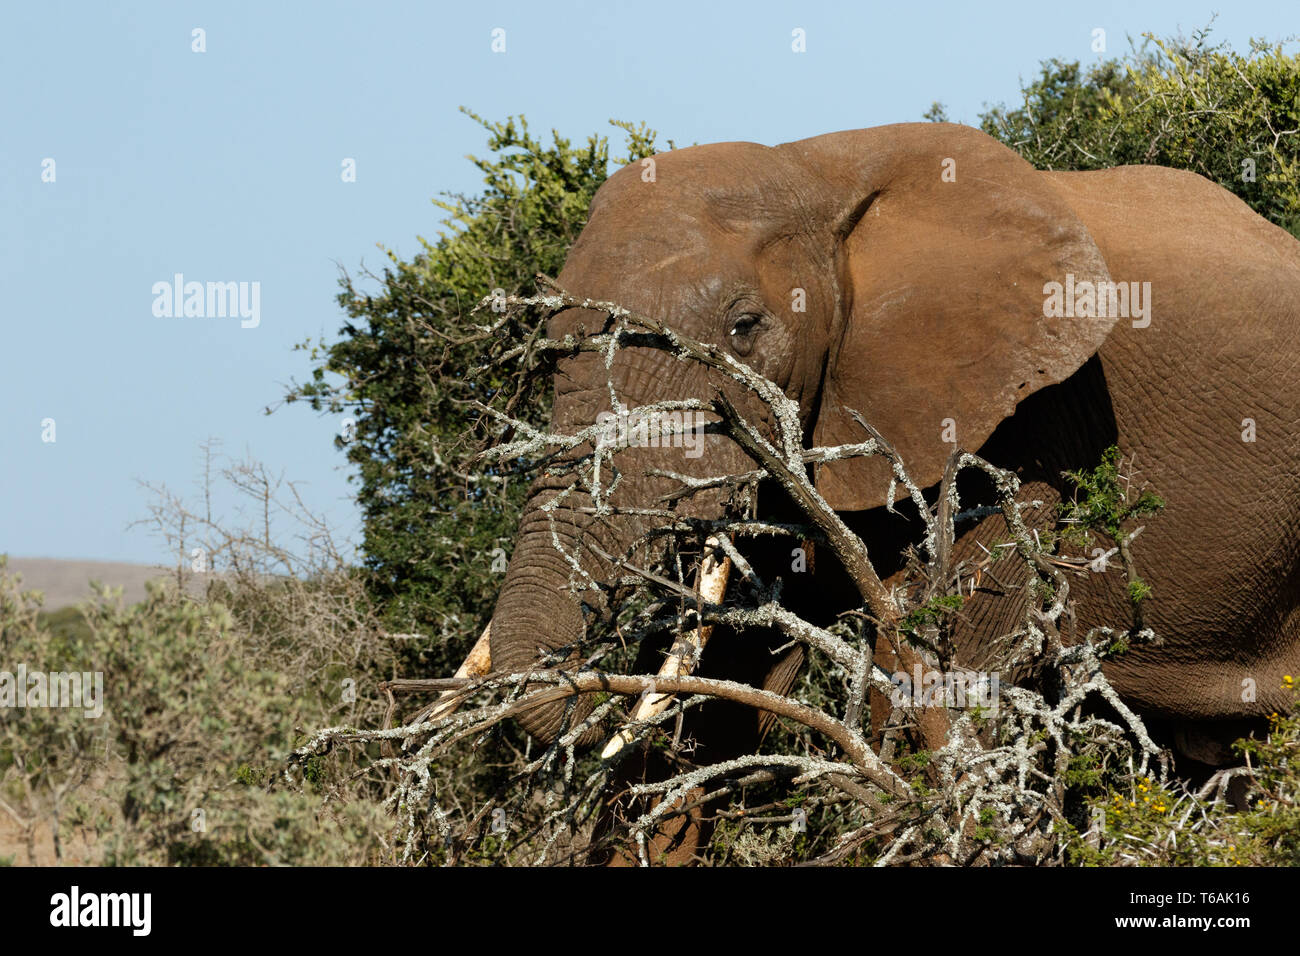 Bush Elephant hiding behind the branches Stock Photo